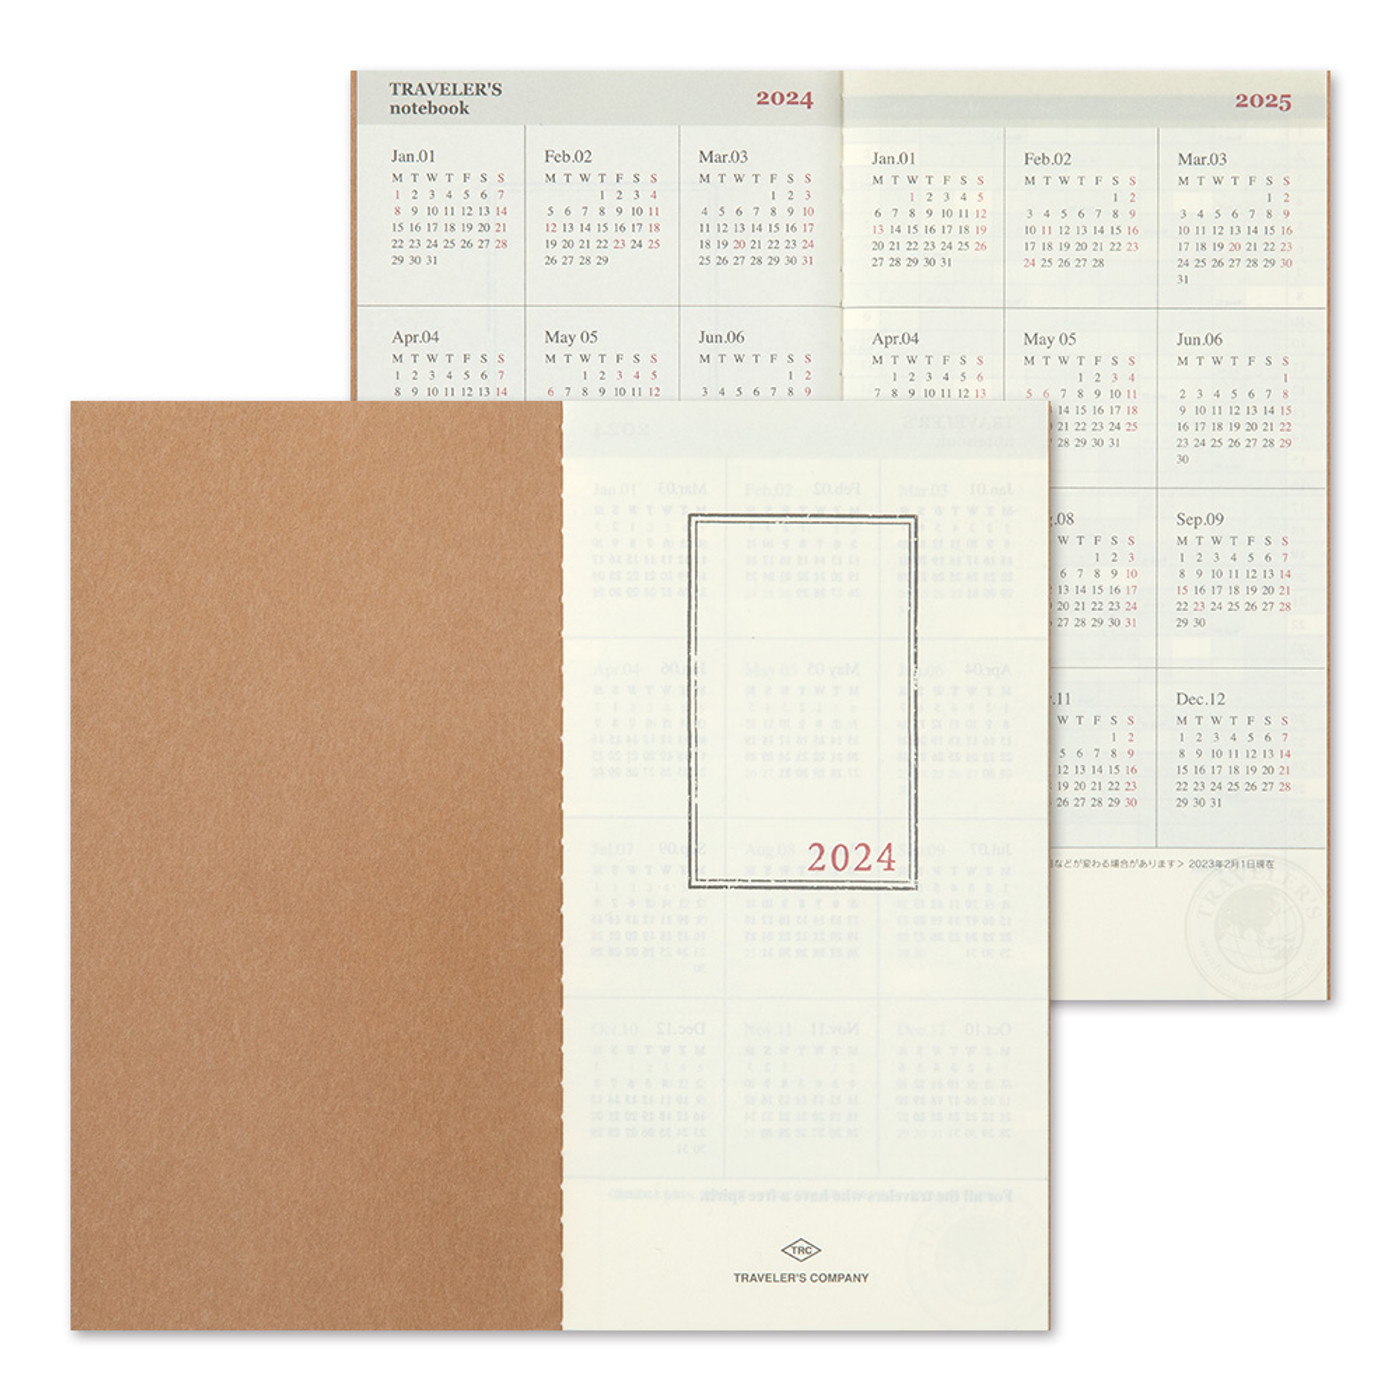 TRAVELER'S notebook 2024 monthly diary